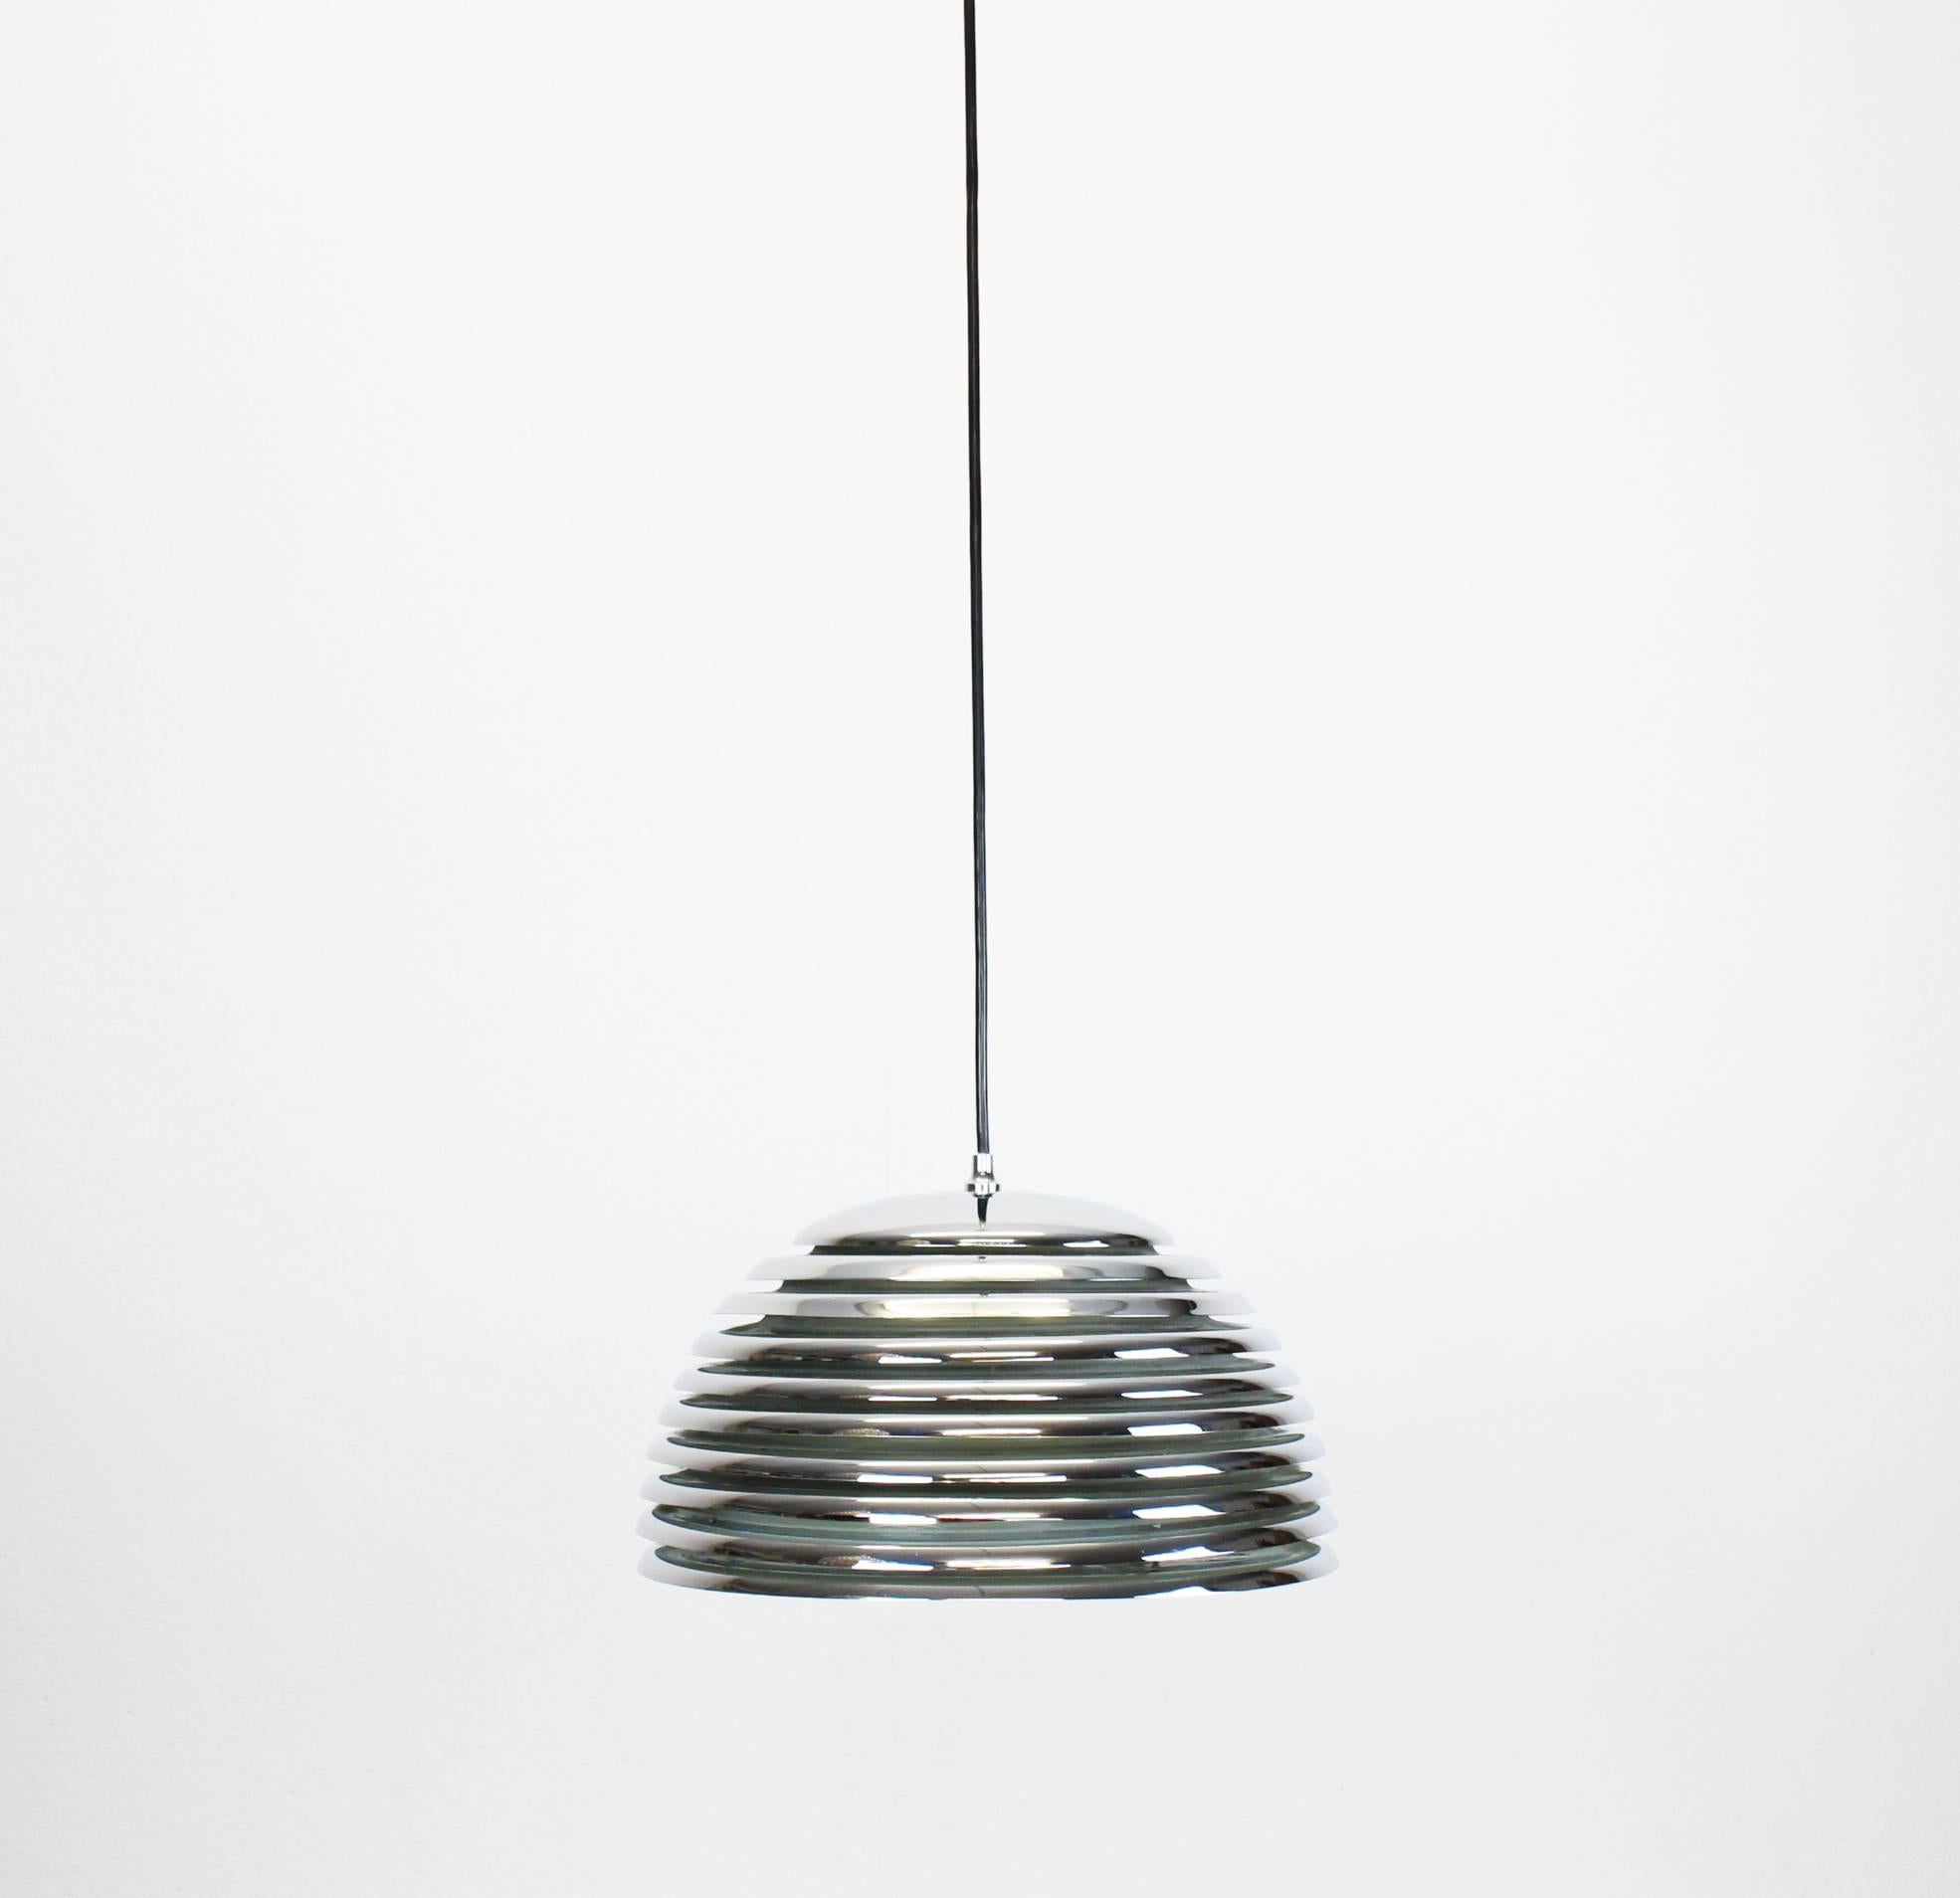 Very nice pendant light with chrome rings, designed by Kazuo Motozawa for Staff Leuchten manufactured in Germany, circa 1970s.

High quality and in very good condition. Cleaned, well-wired and ready to use.

The fixture requires 1 x E27 standard